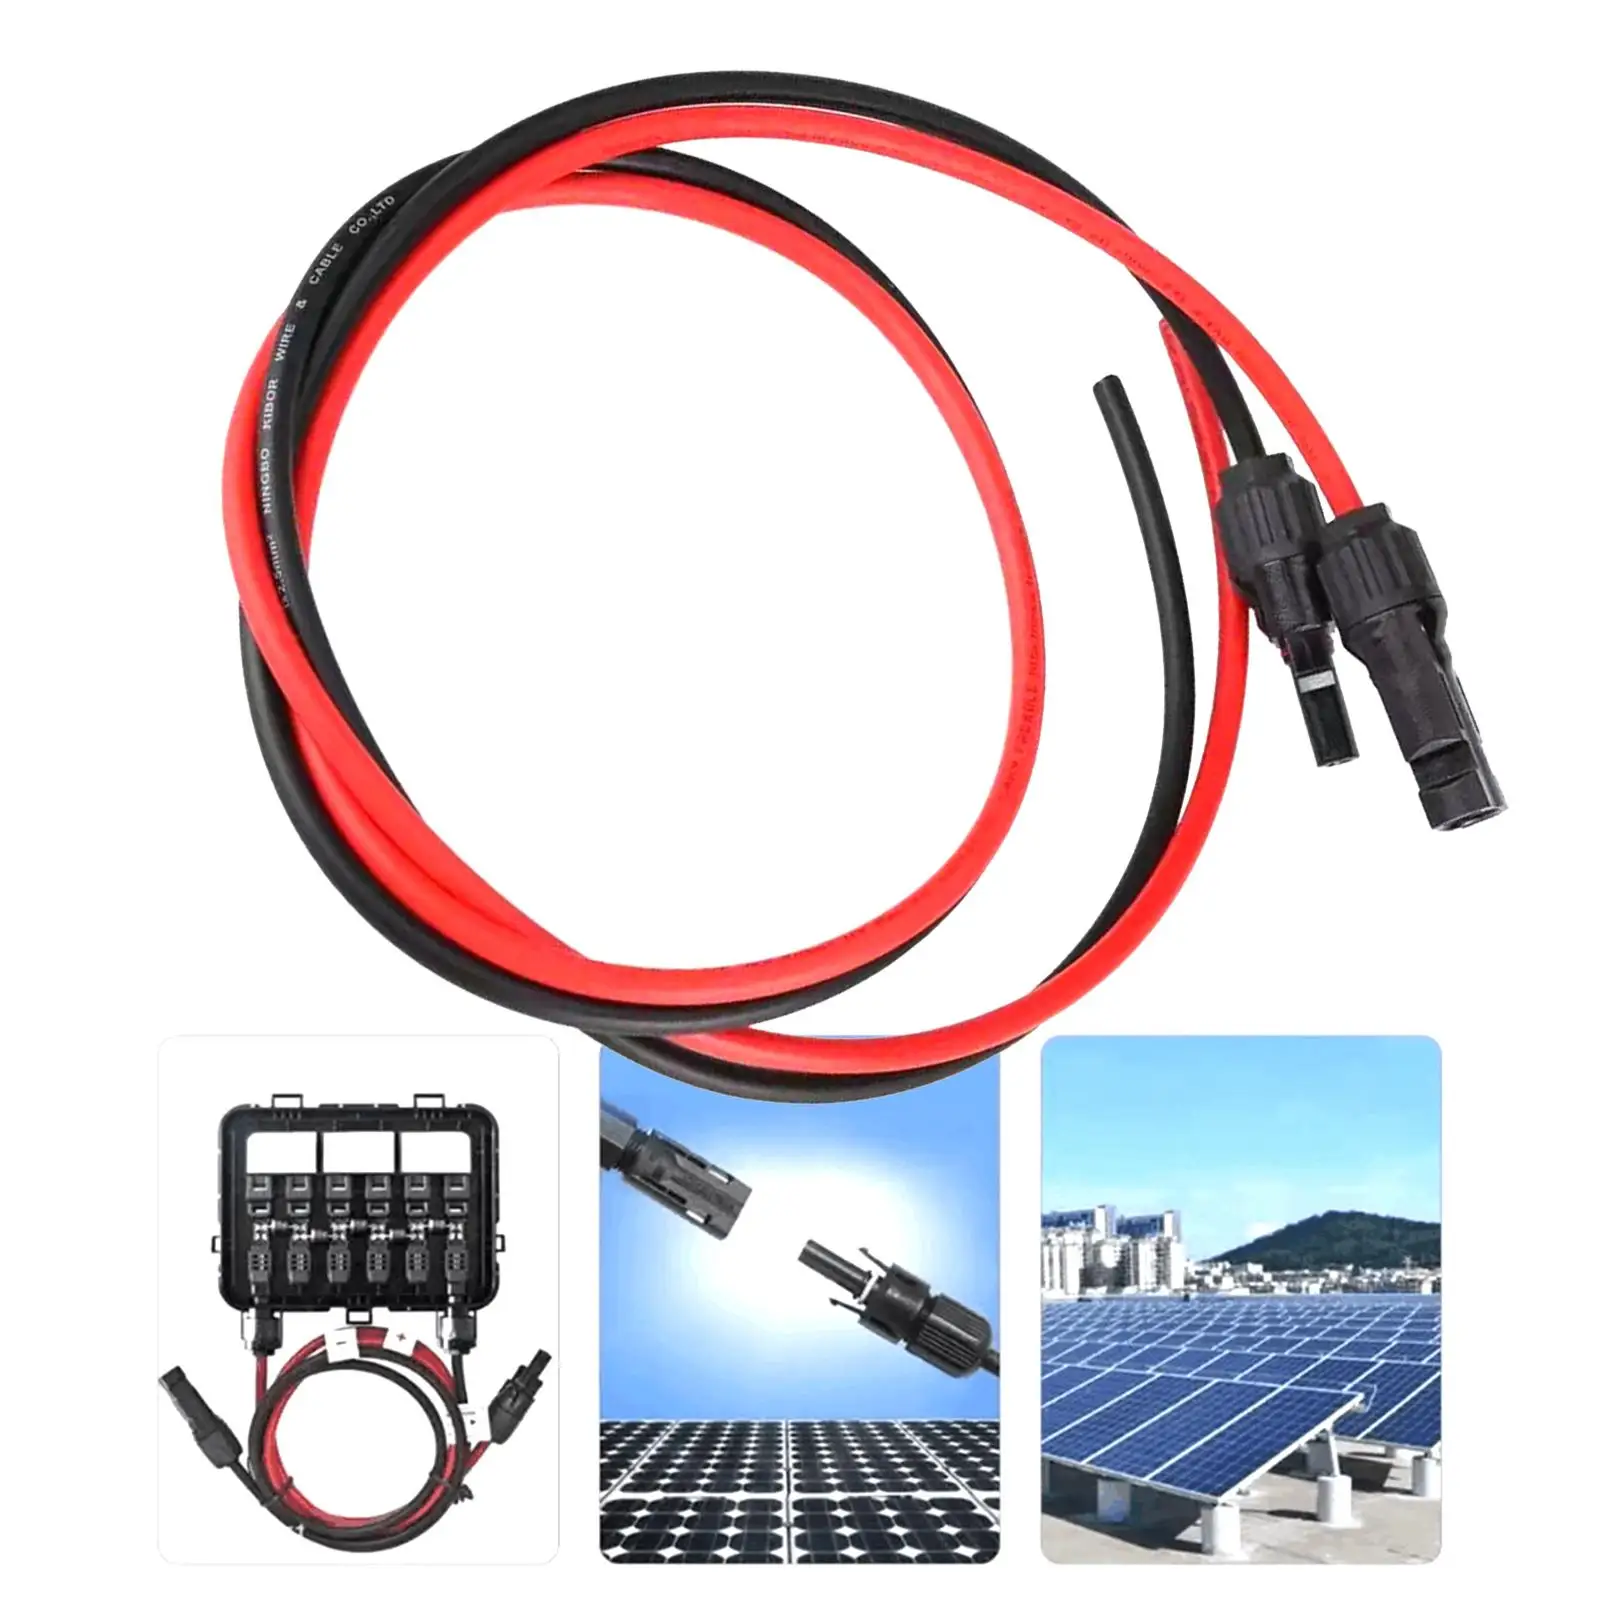 Solar Wire Extension Black Red Cords Female and Male Connector Connector Cable for Garden Yard Traveling Backpacking Camping